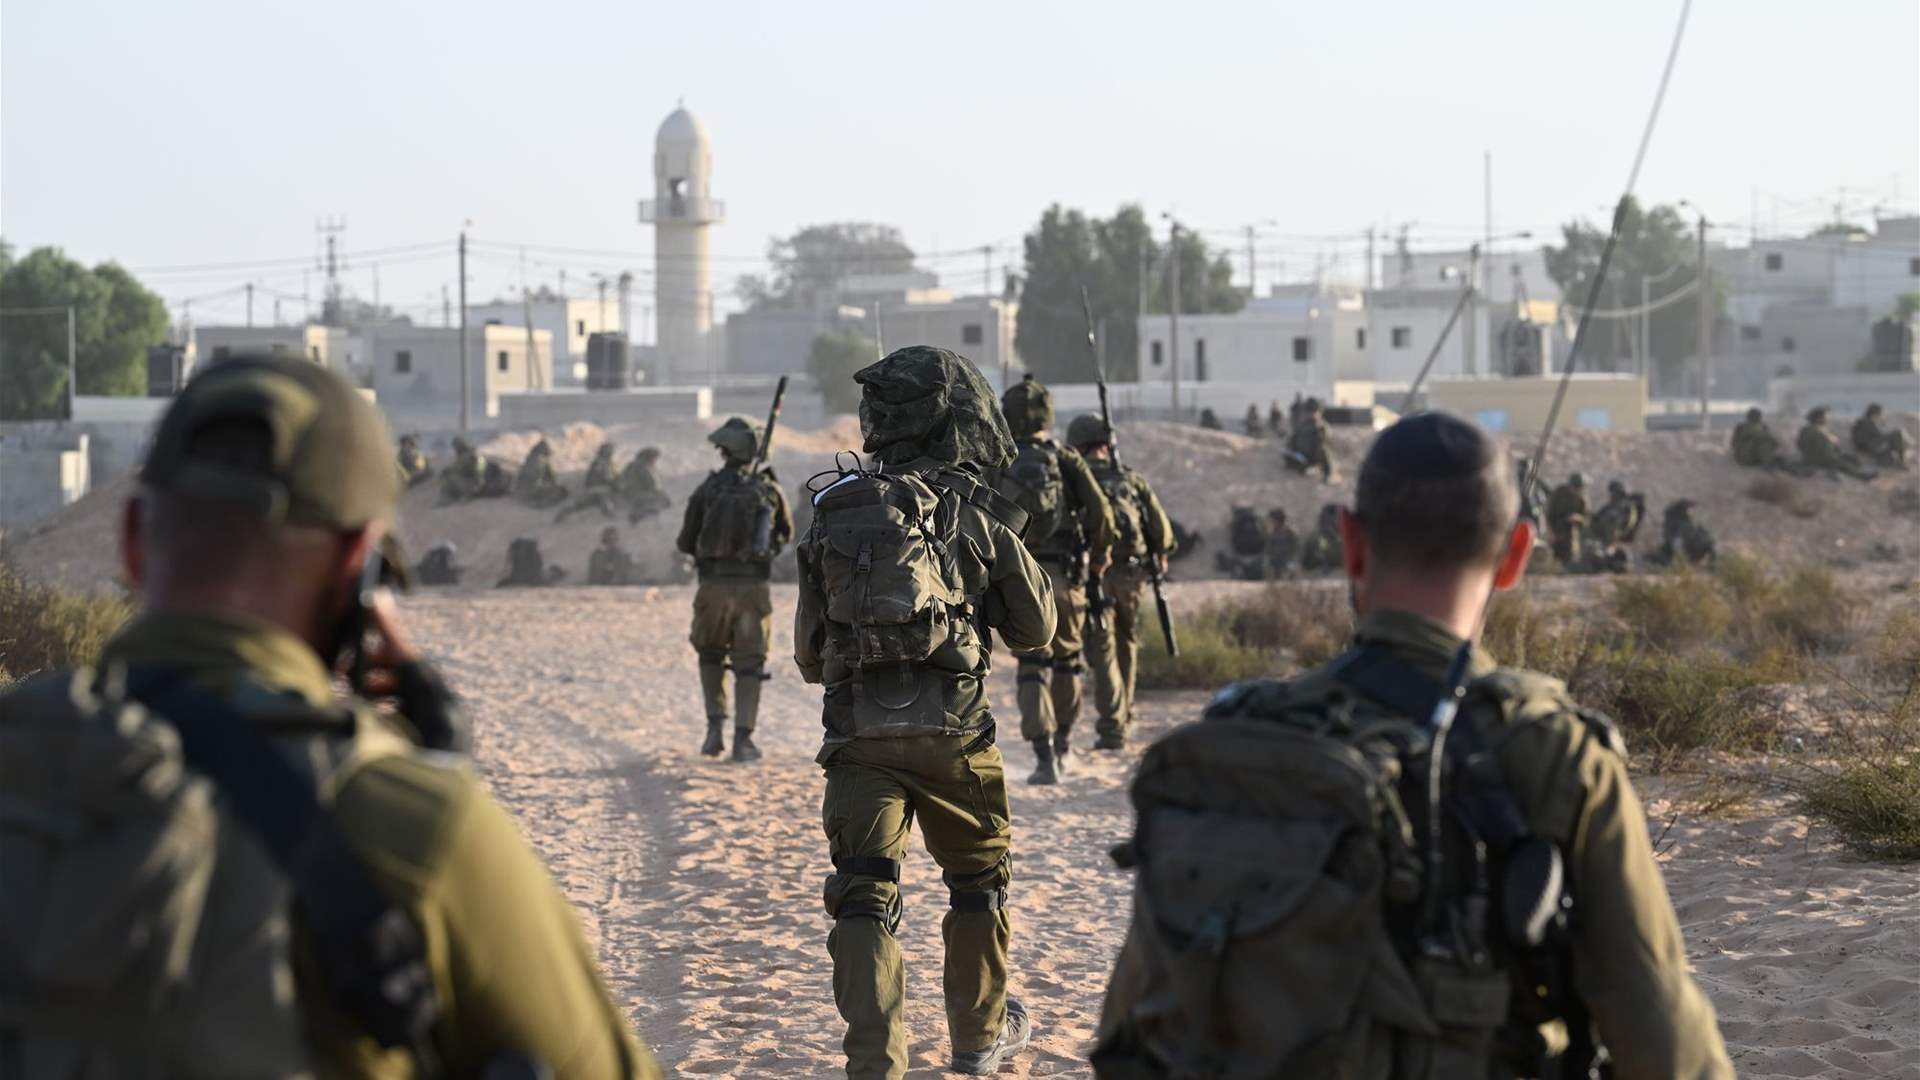 Israeli army to AFP: The October 13 strike on journalists in southern Lebanon took place in an &quot;active combat zone&quot;